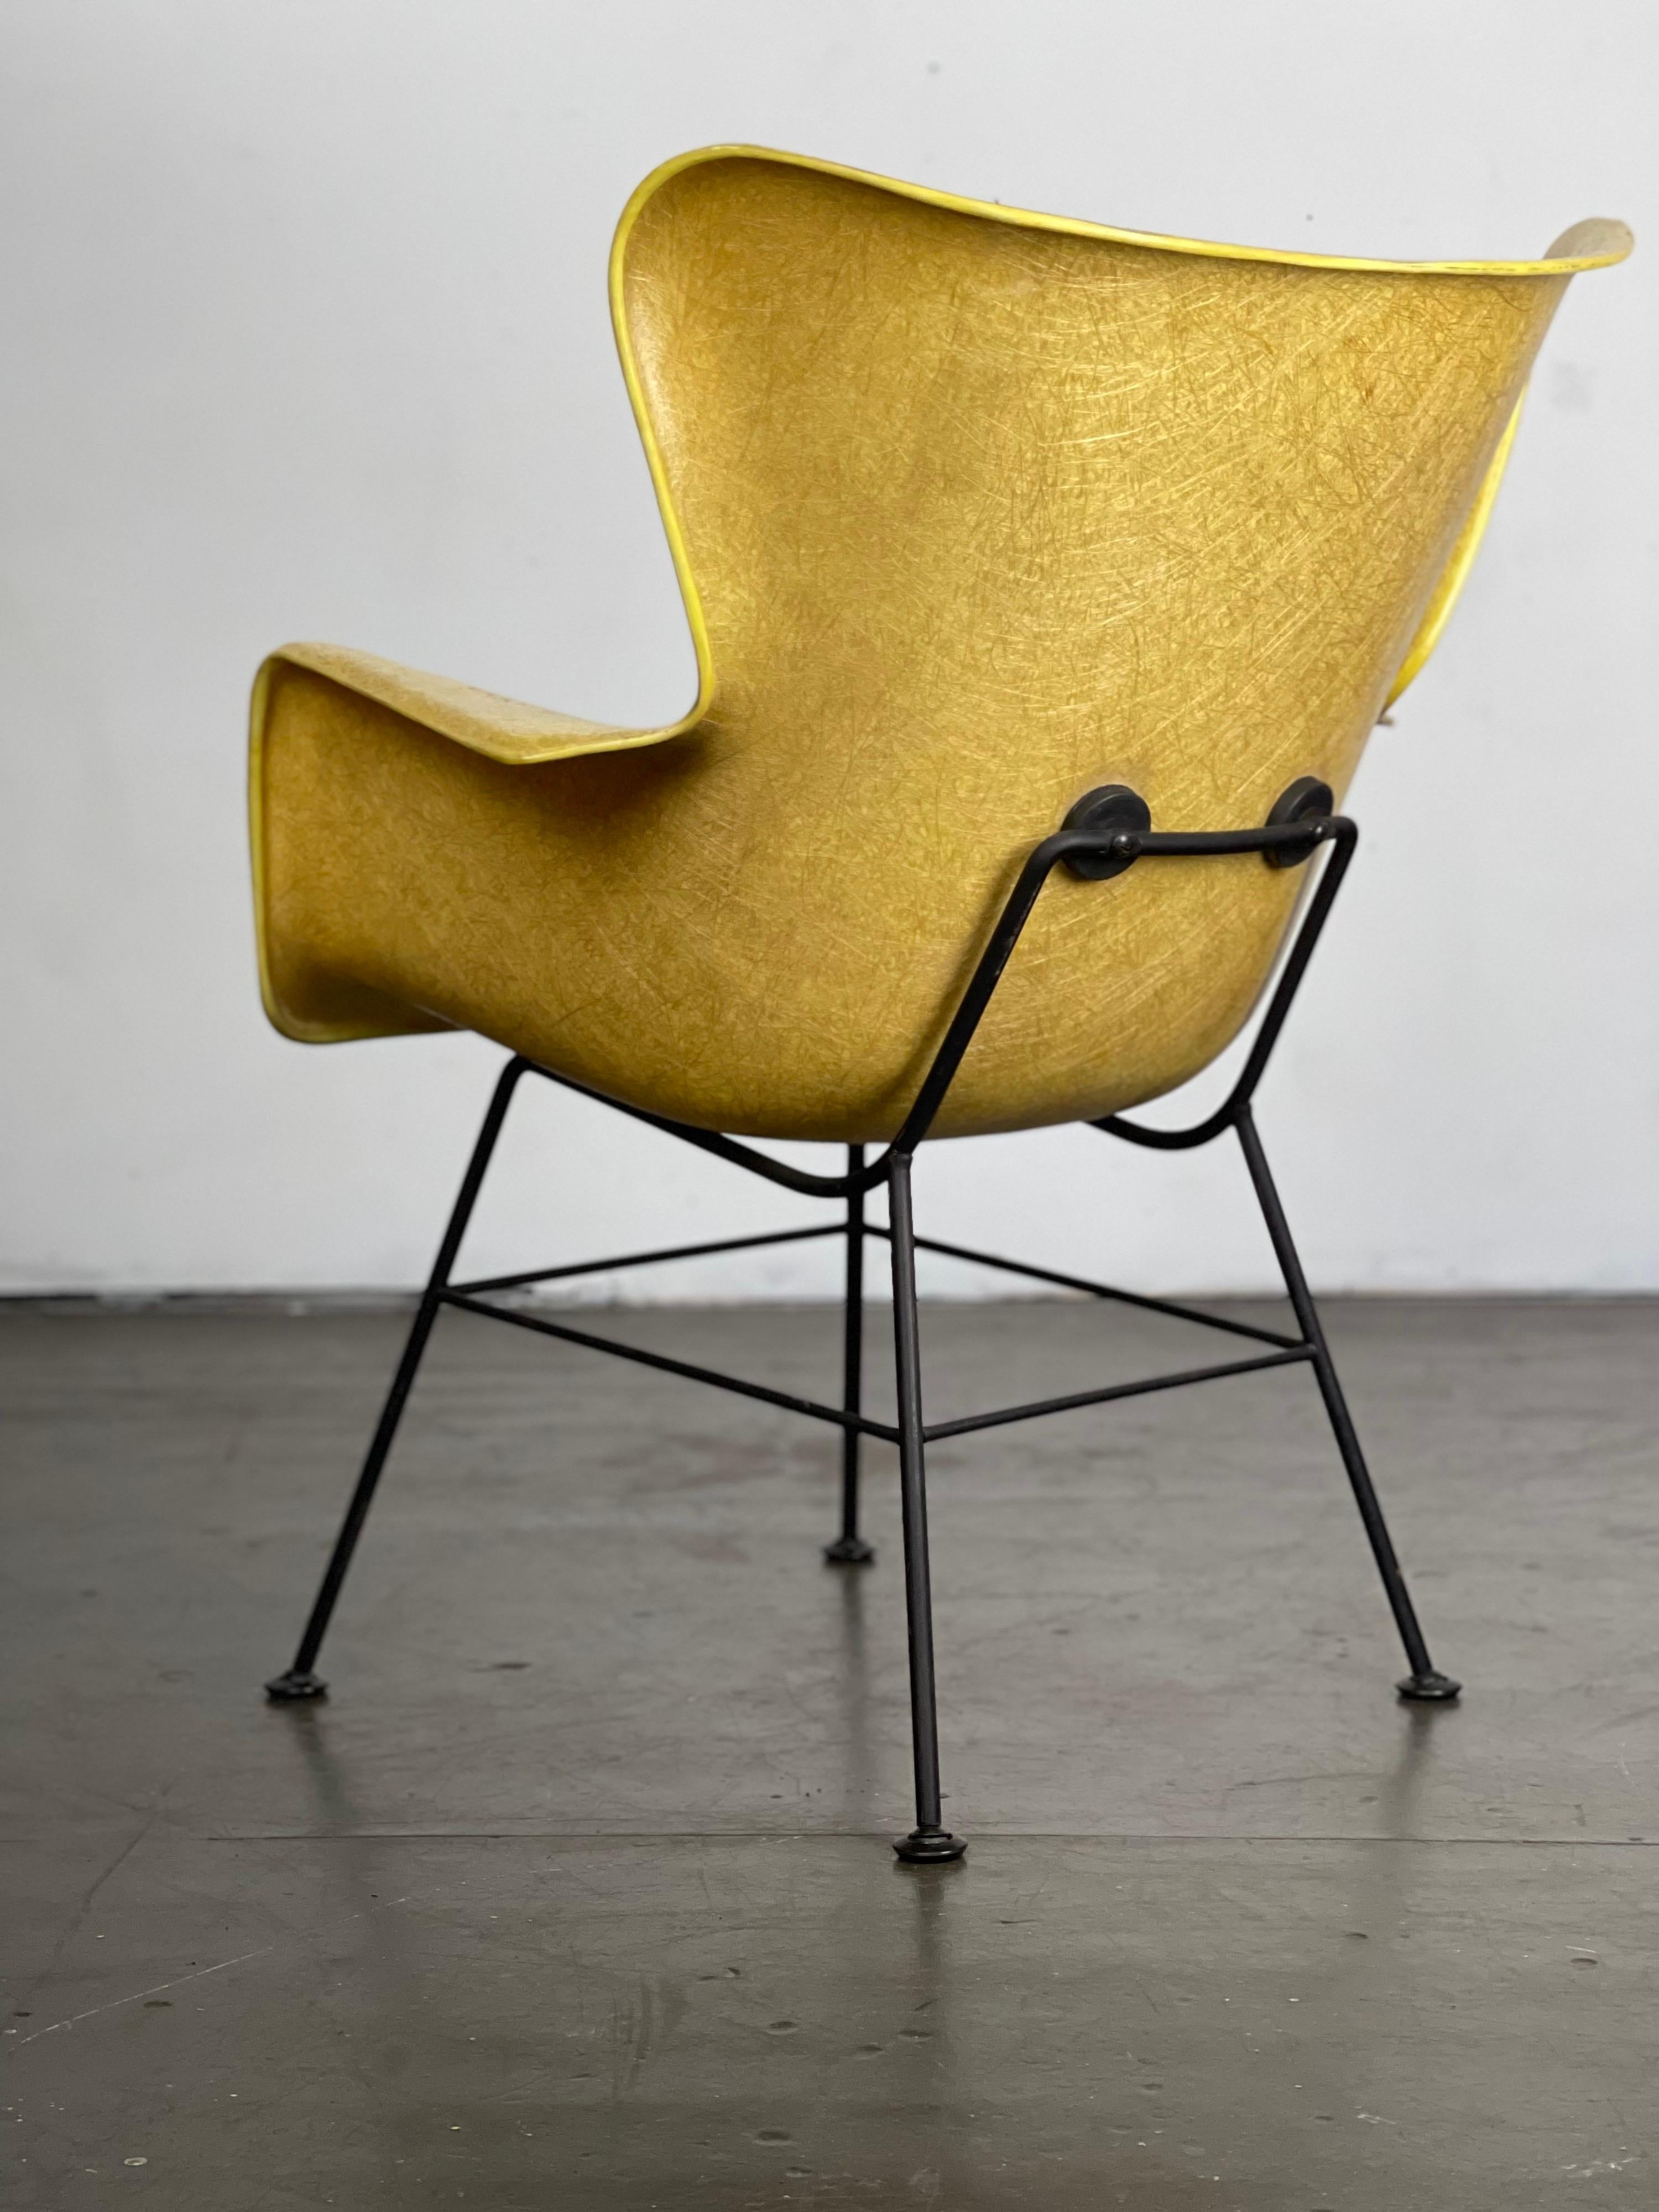 Molded Mid-Century Modern Sculptural Lounge Chair by Lawrence Peabody for Selig Labeled